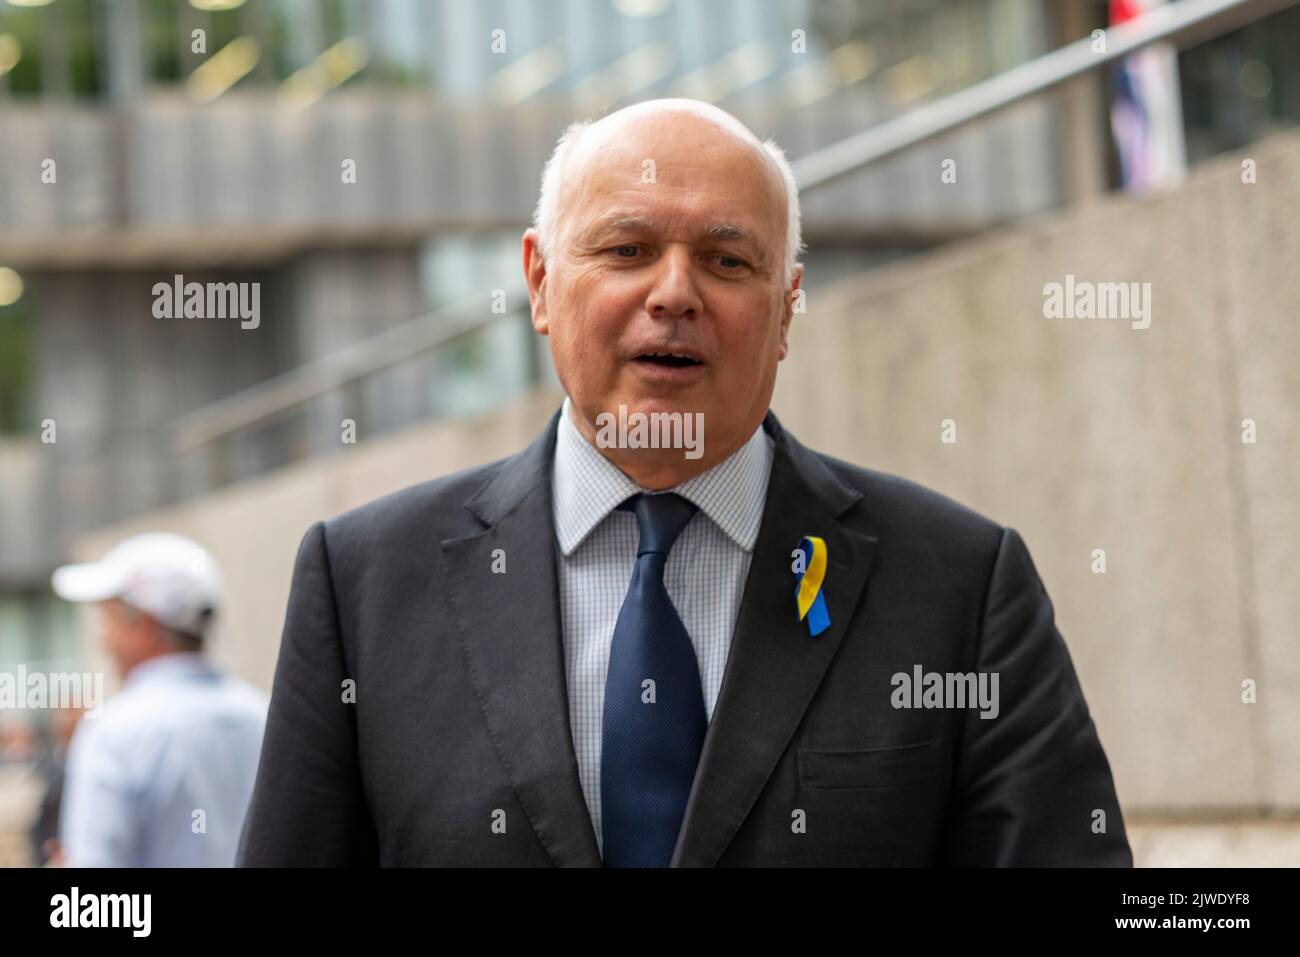 Queen Elizabeth II Centre, Westminster, London, UK. 5th Sep, 2022. Conservative party members and officials are leaving the Centre after choosing Liz Truss as the new leader of the party, and therefore the new Prime Minister. Protesters gathered outside. Iain Duncan Smith MP leaving Stock Photo